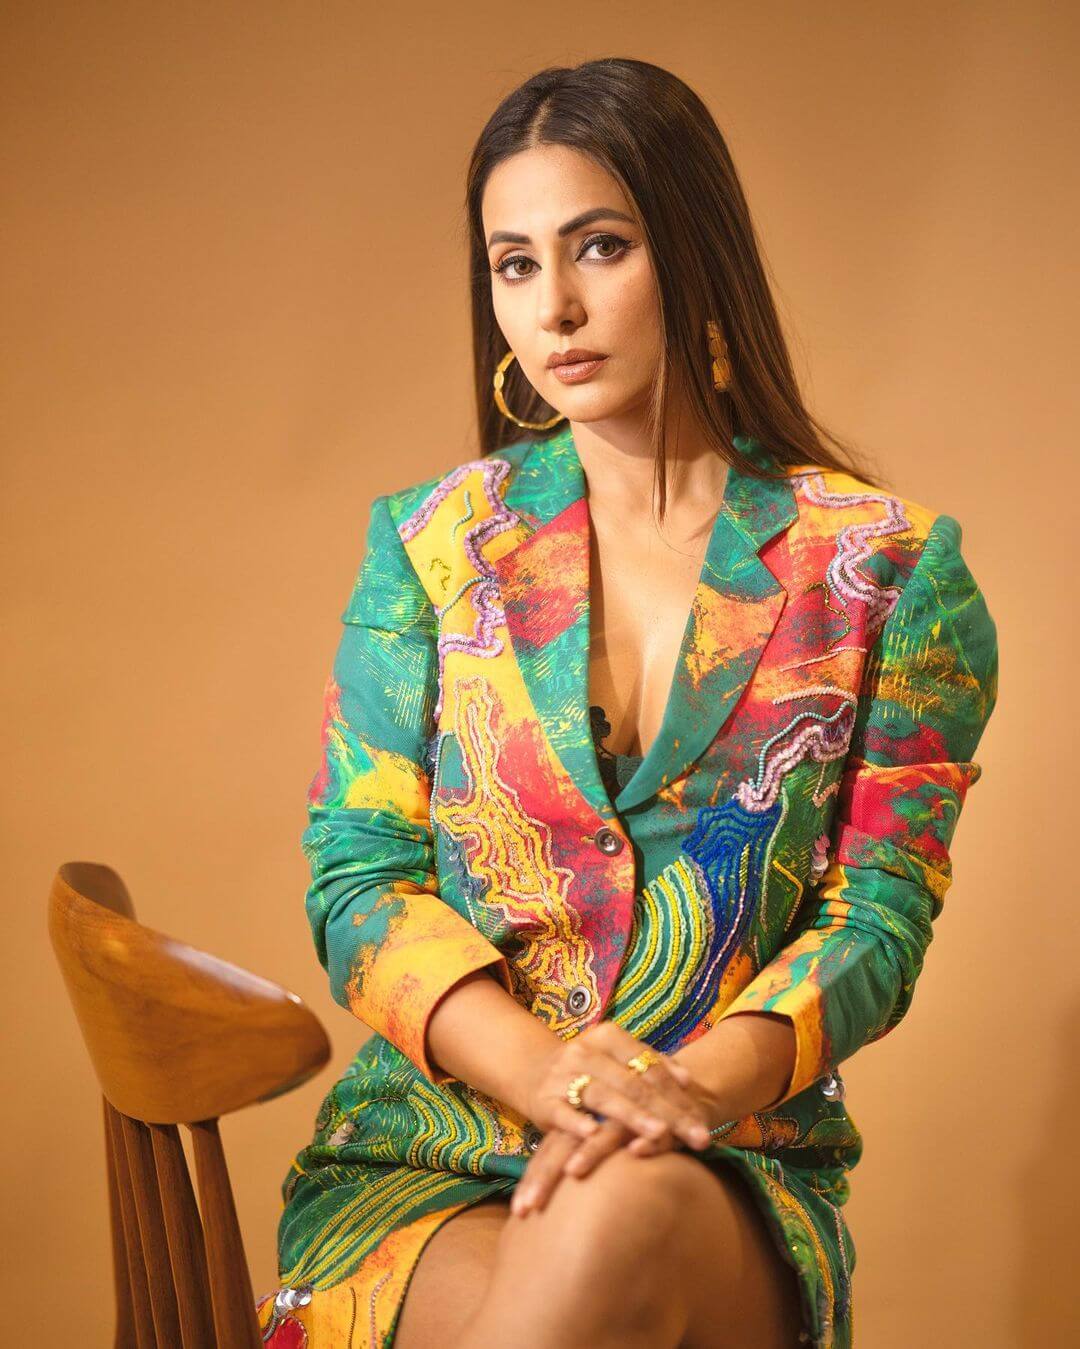 Hina Khan Goes Chic In Colorful Sequin Jacket Dress And Gold Hoops 846611